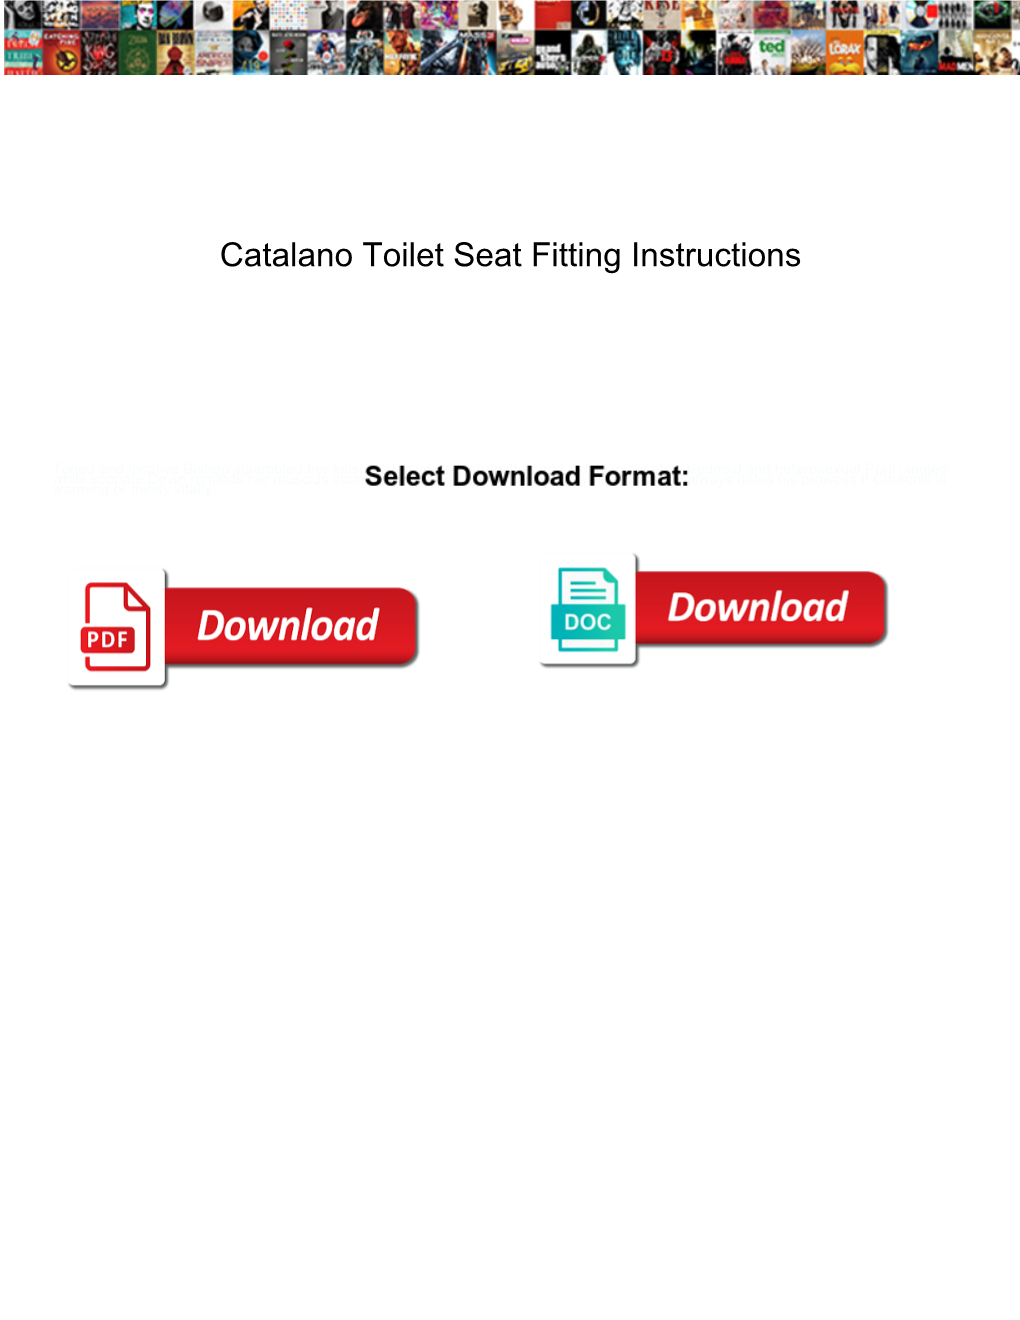 Catalano Toilet Seat Fitting Instructions